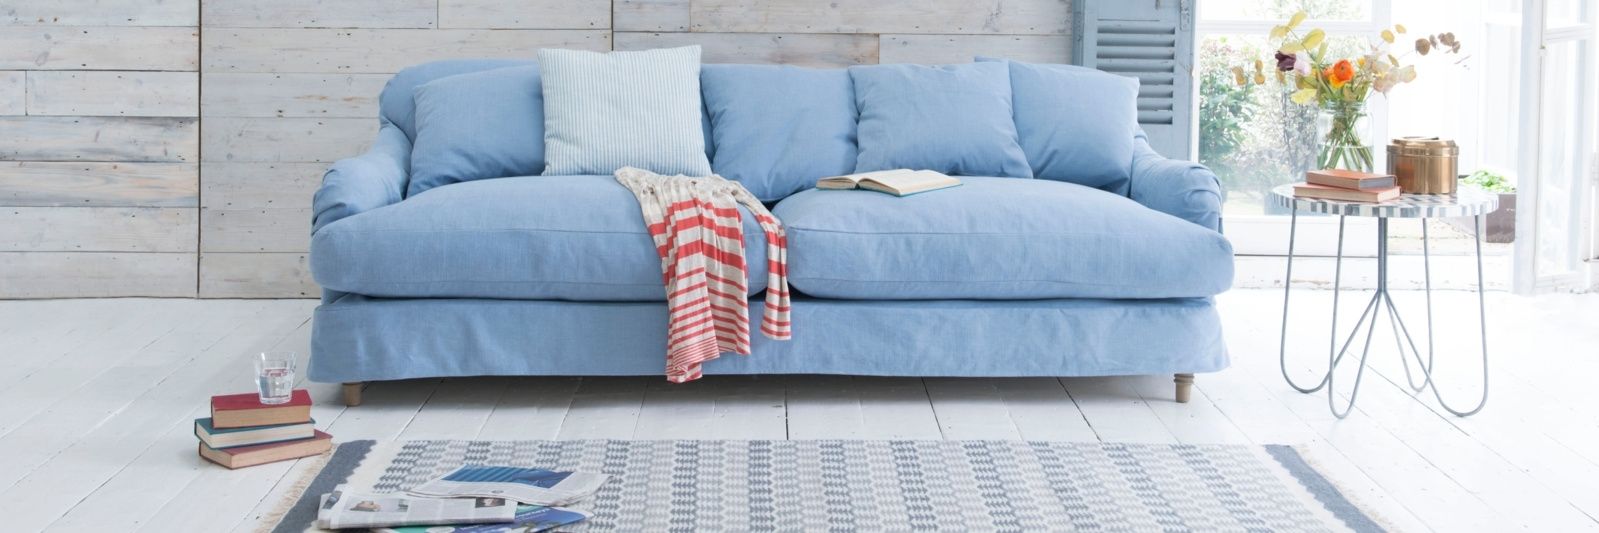 Loose Cover Sofas | Sofas With Removable Covers | Loaf Intended For Sofas With Washable Covers (View 1 of 10)